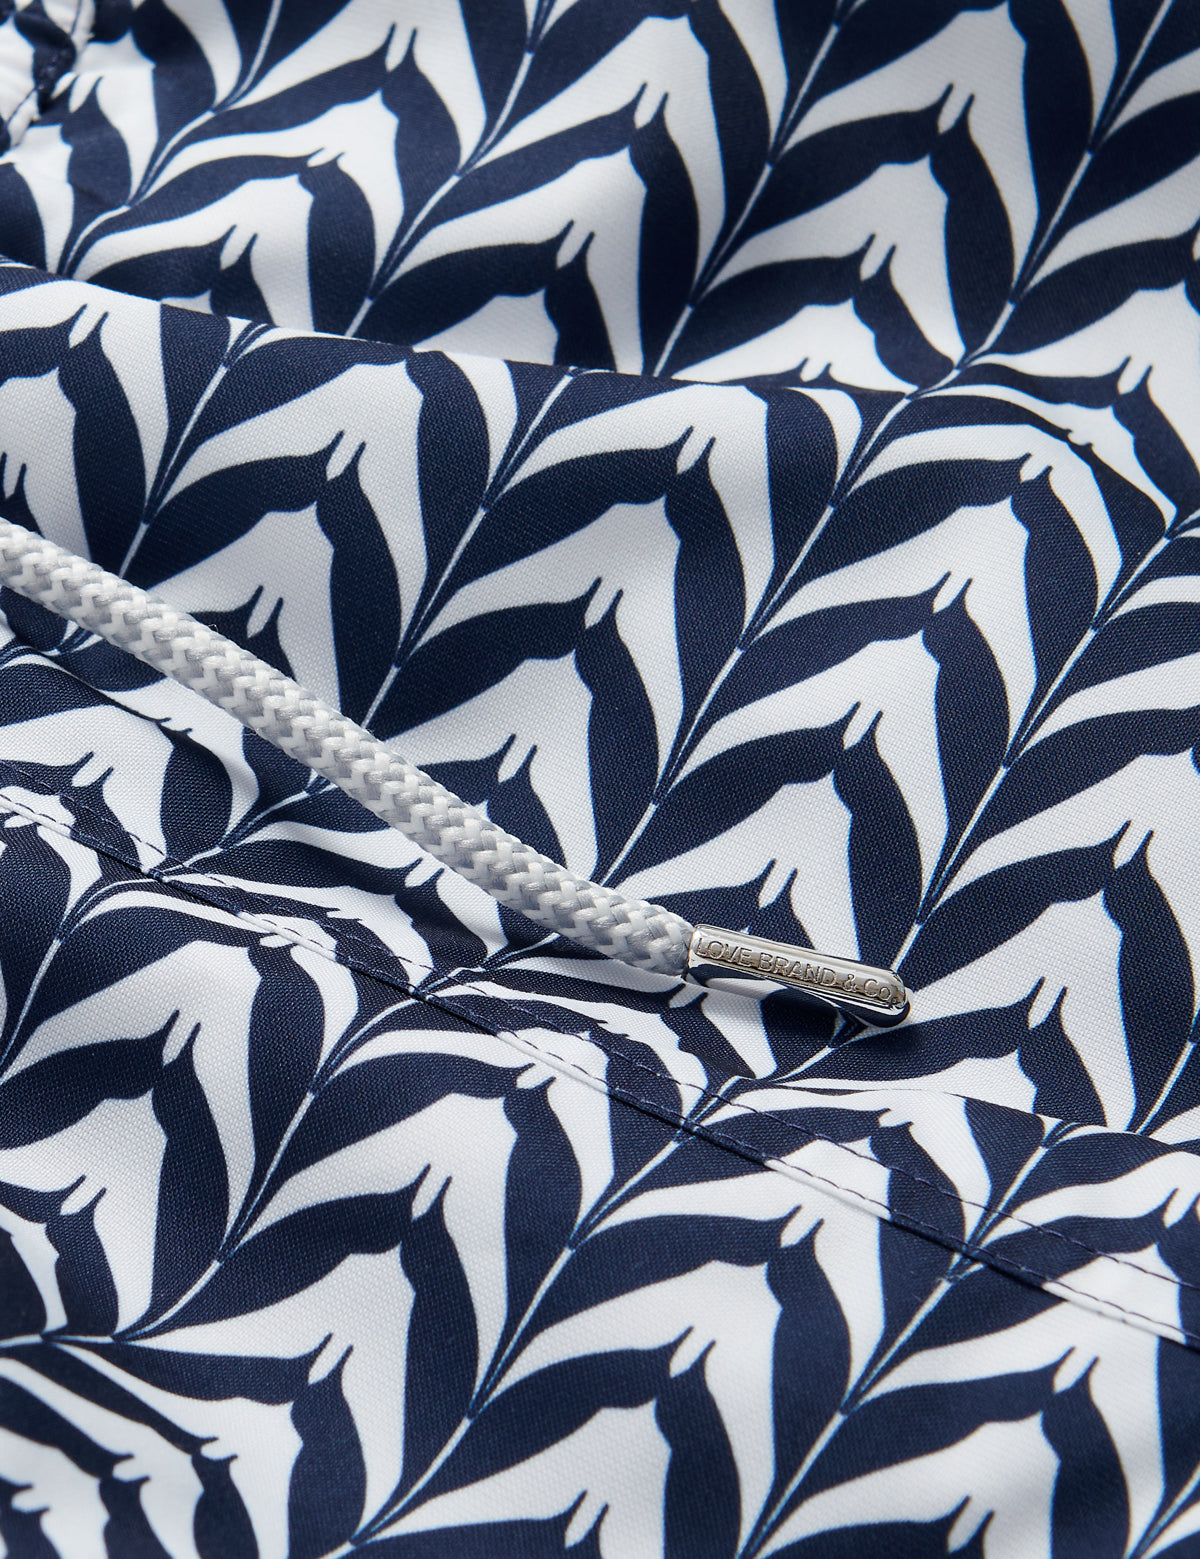 Close-up of Men's Feather Icing Staniel Swim Shorts fabric showcasing blue and white feather pattern and drawstring detail.